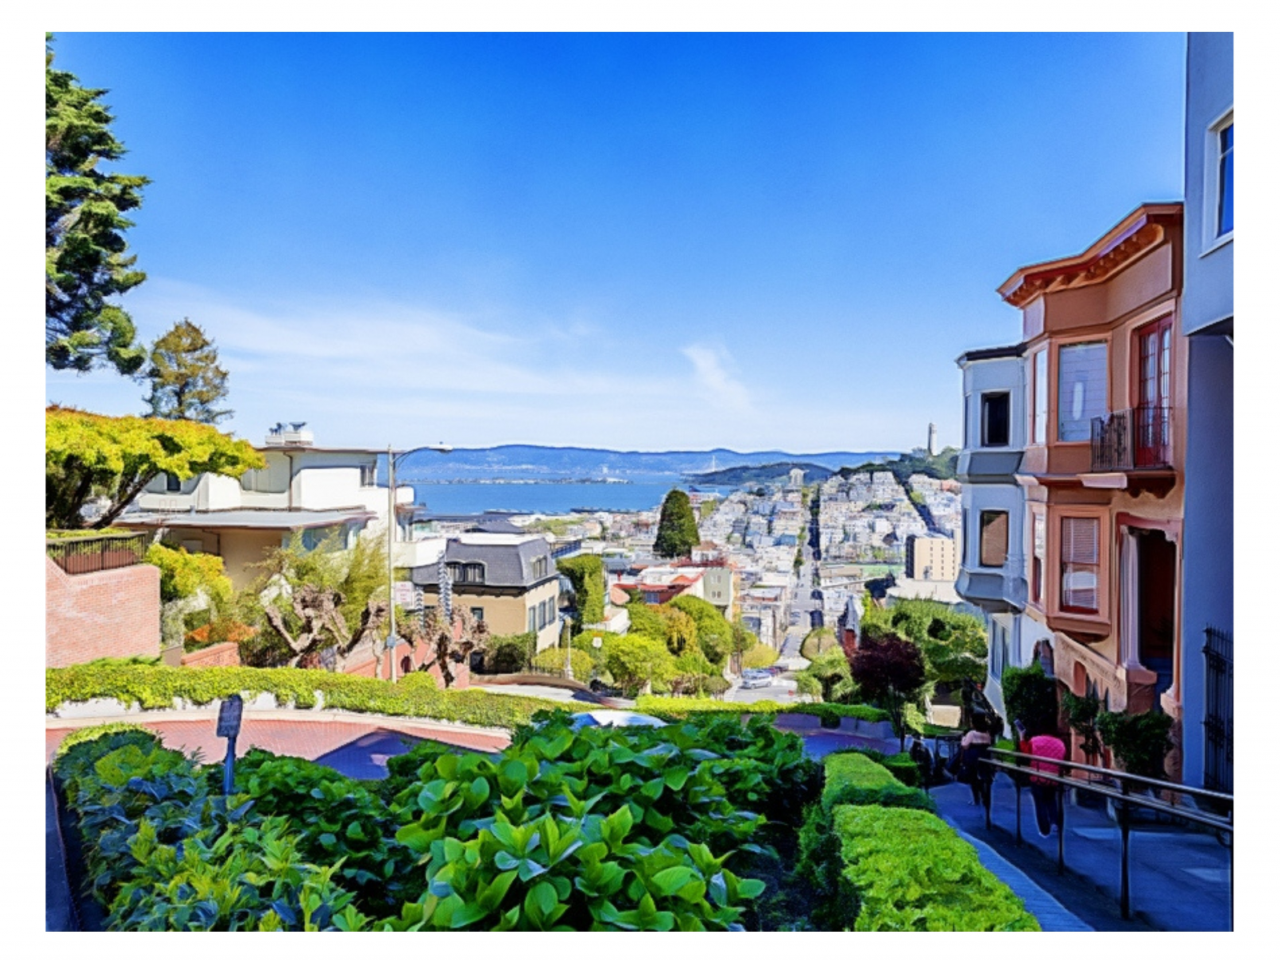 Lombard Street with Coit Tower in background